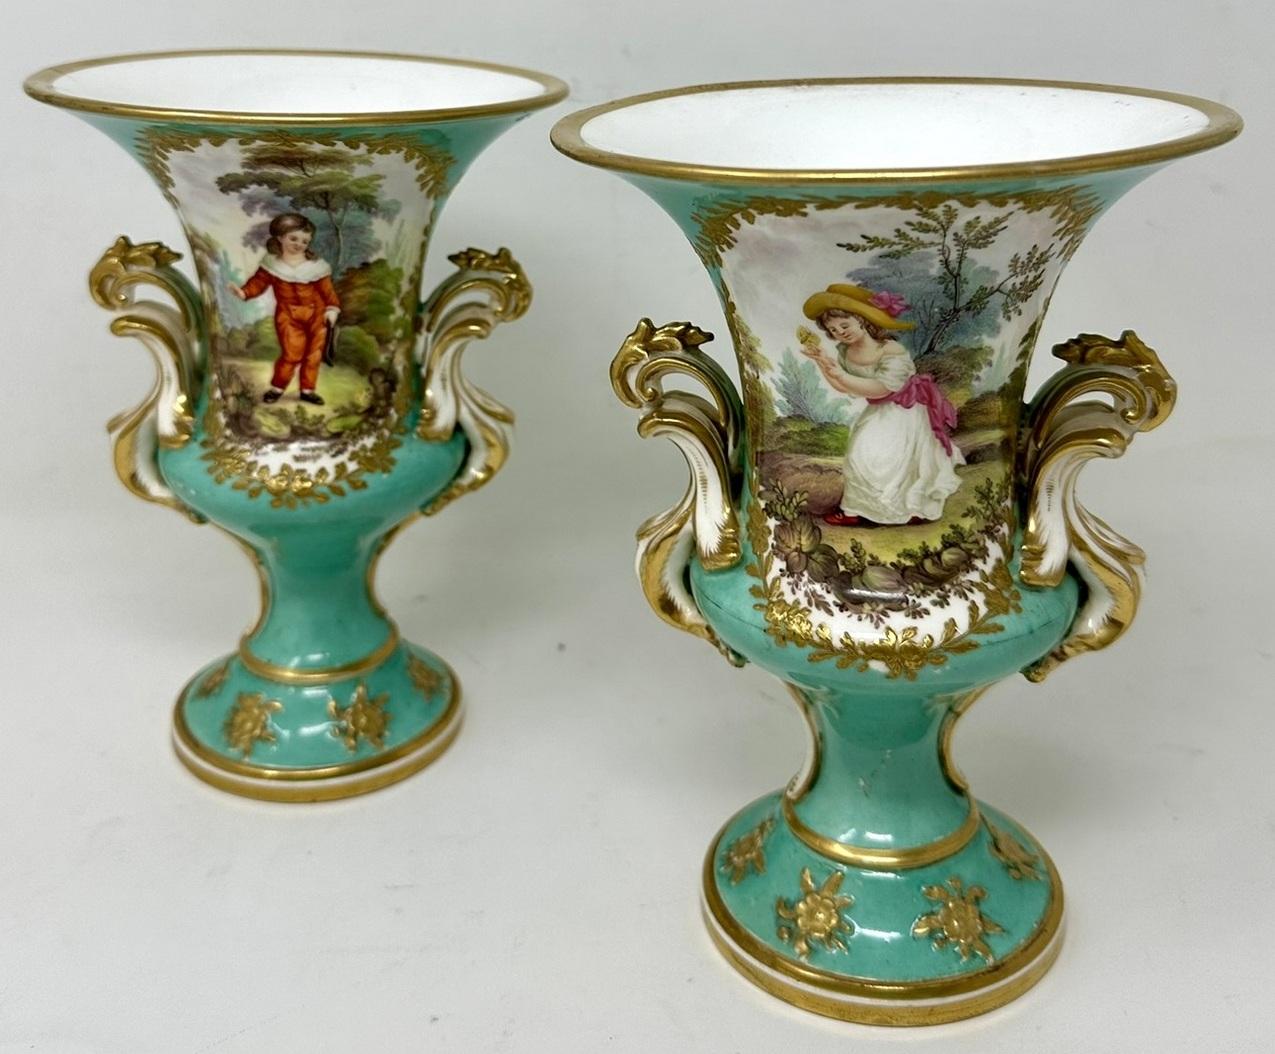 Wonderful Identical Pair of Early English Porcelain China Flared Rim Campagne form Urns with very ornate gilt twin handles modelled in the Rococo taste, firmly attributed to Coalport and painted by artist John Randall. Mid to late Nineteenth